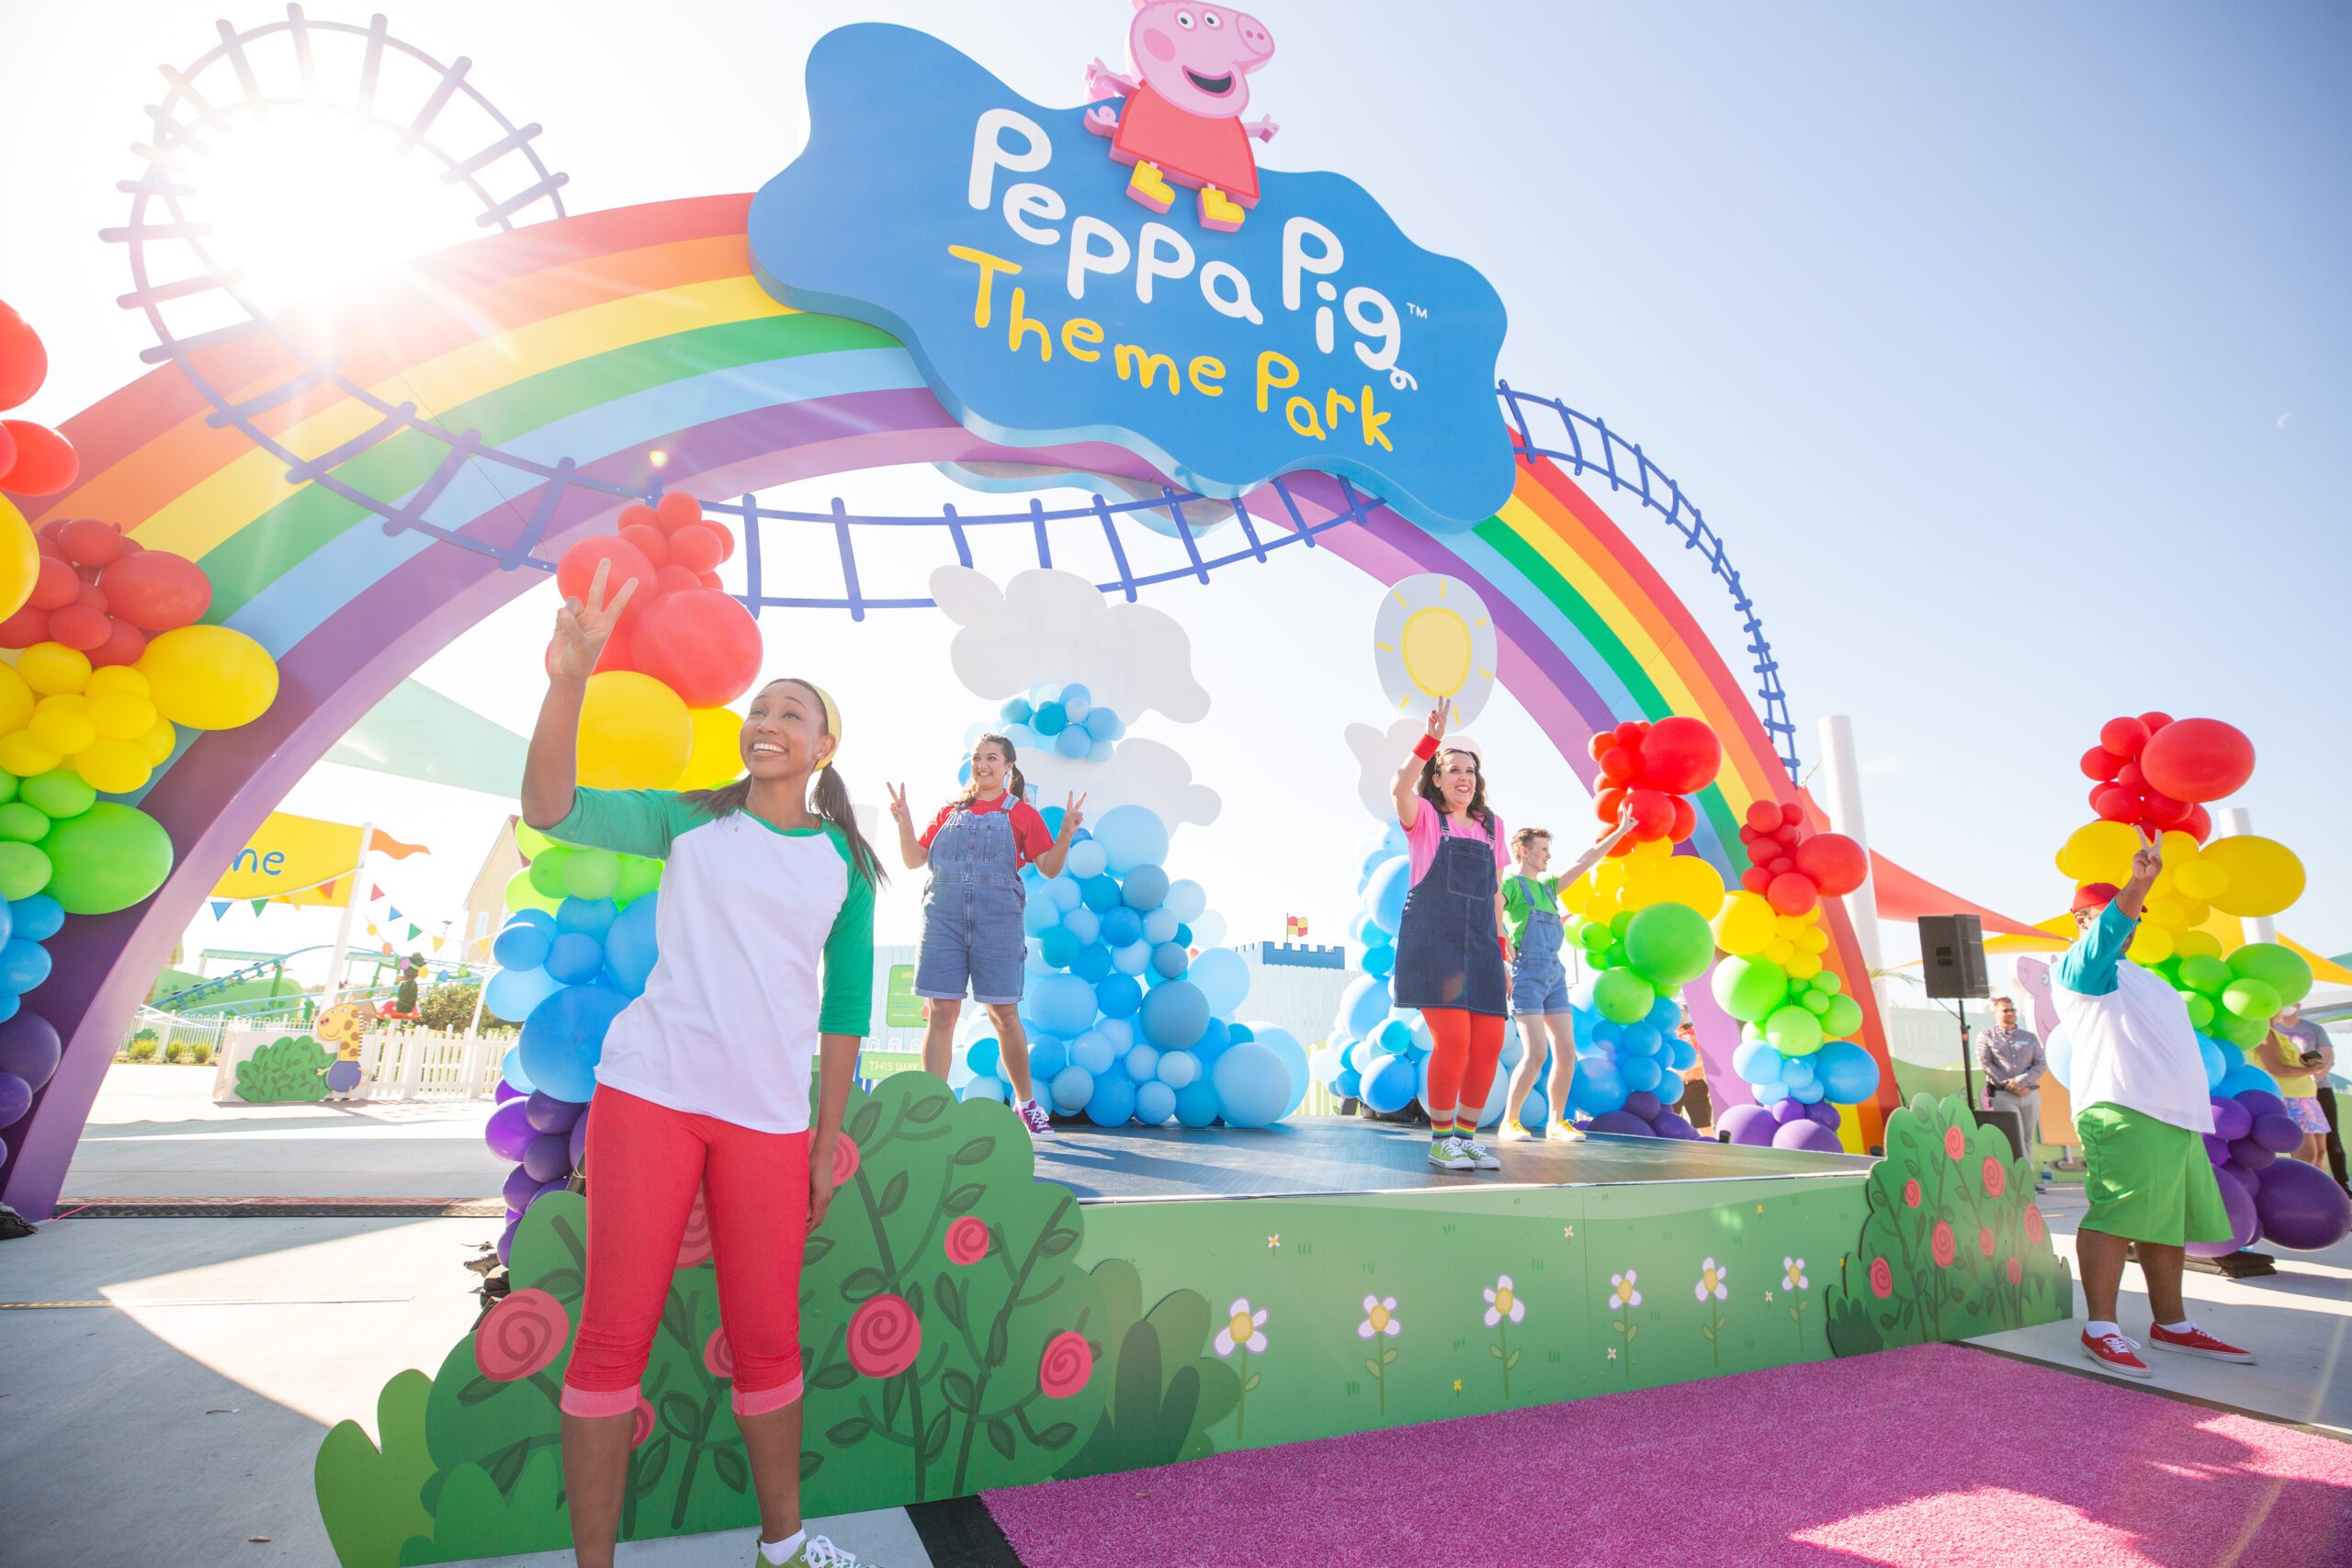 https://www.bartonmalow.com/wp-content/uploads/2022/10/Grand-Opening-1_Peppa-Pig-Theme-Park-scaled.jpg